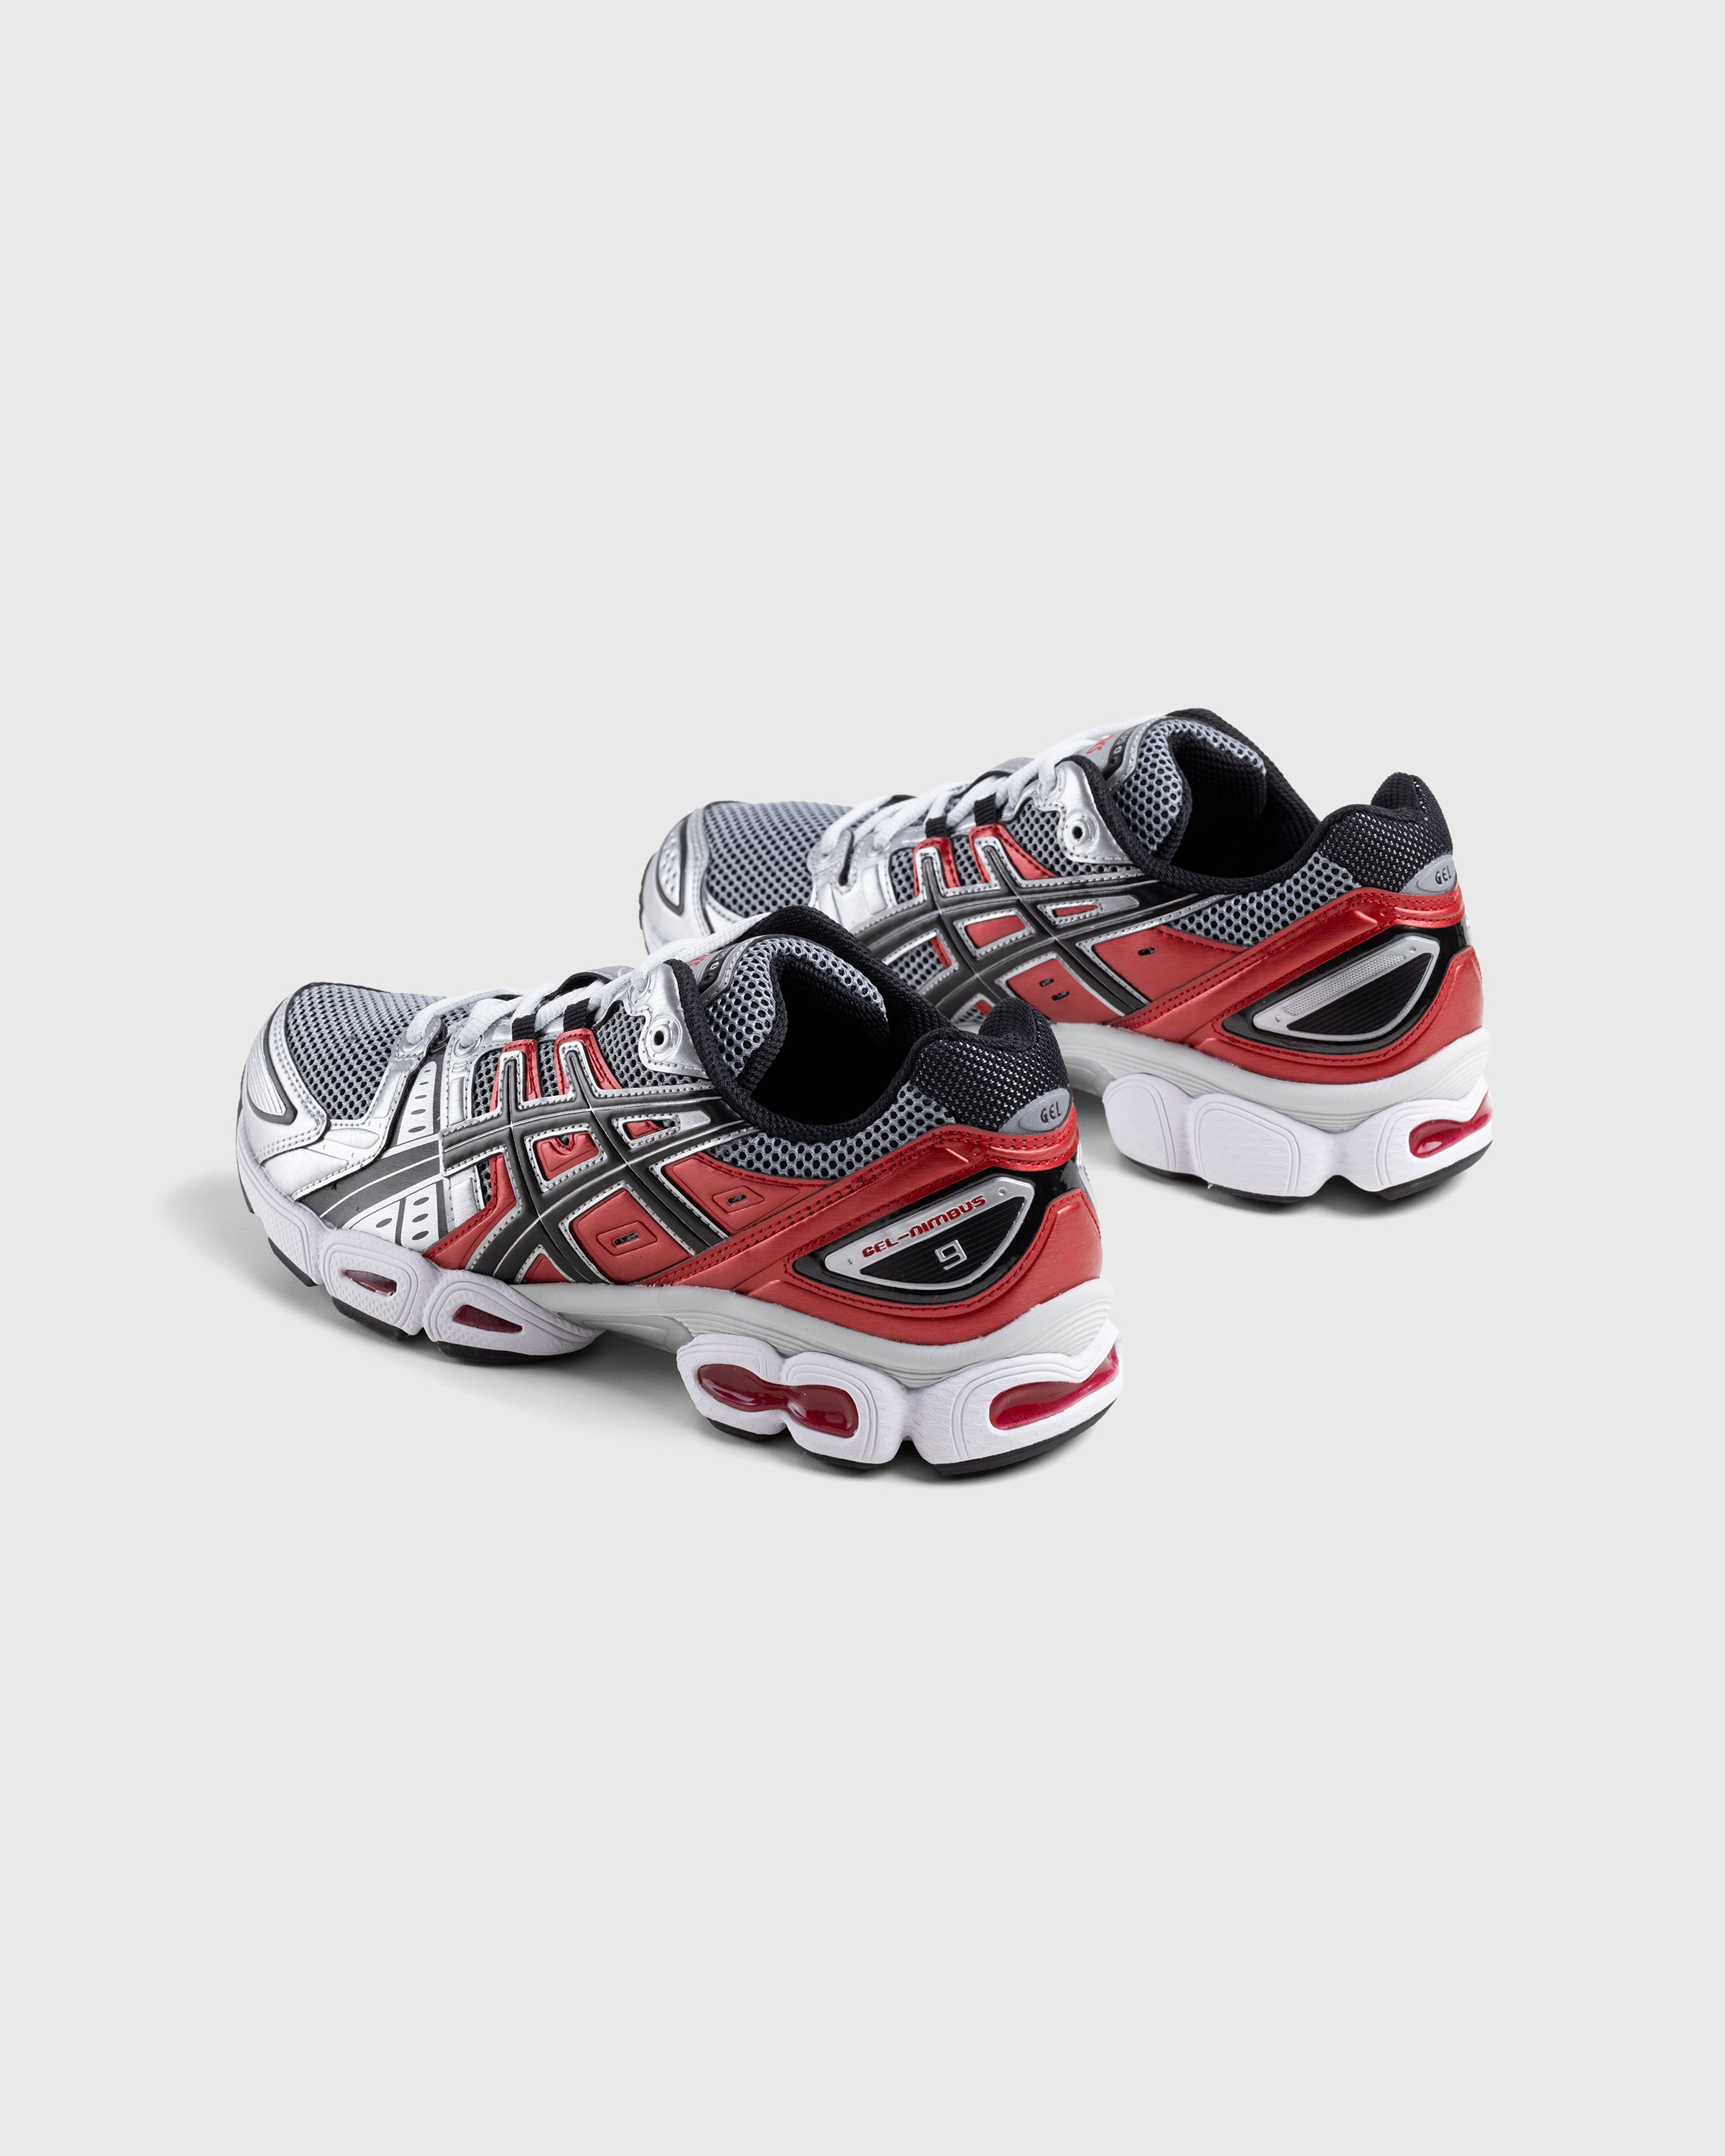 asics - Gel-Nimbus 9 Pure Silver/Classic Red - Footwear - Red - Image 5